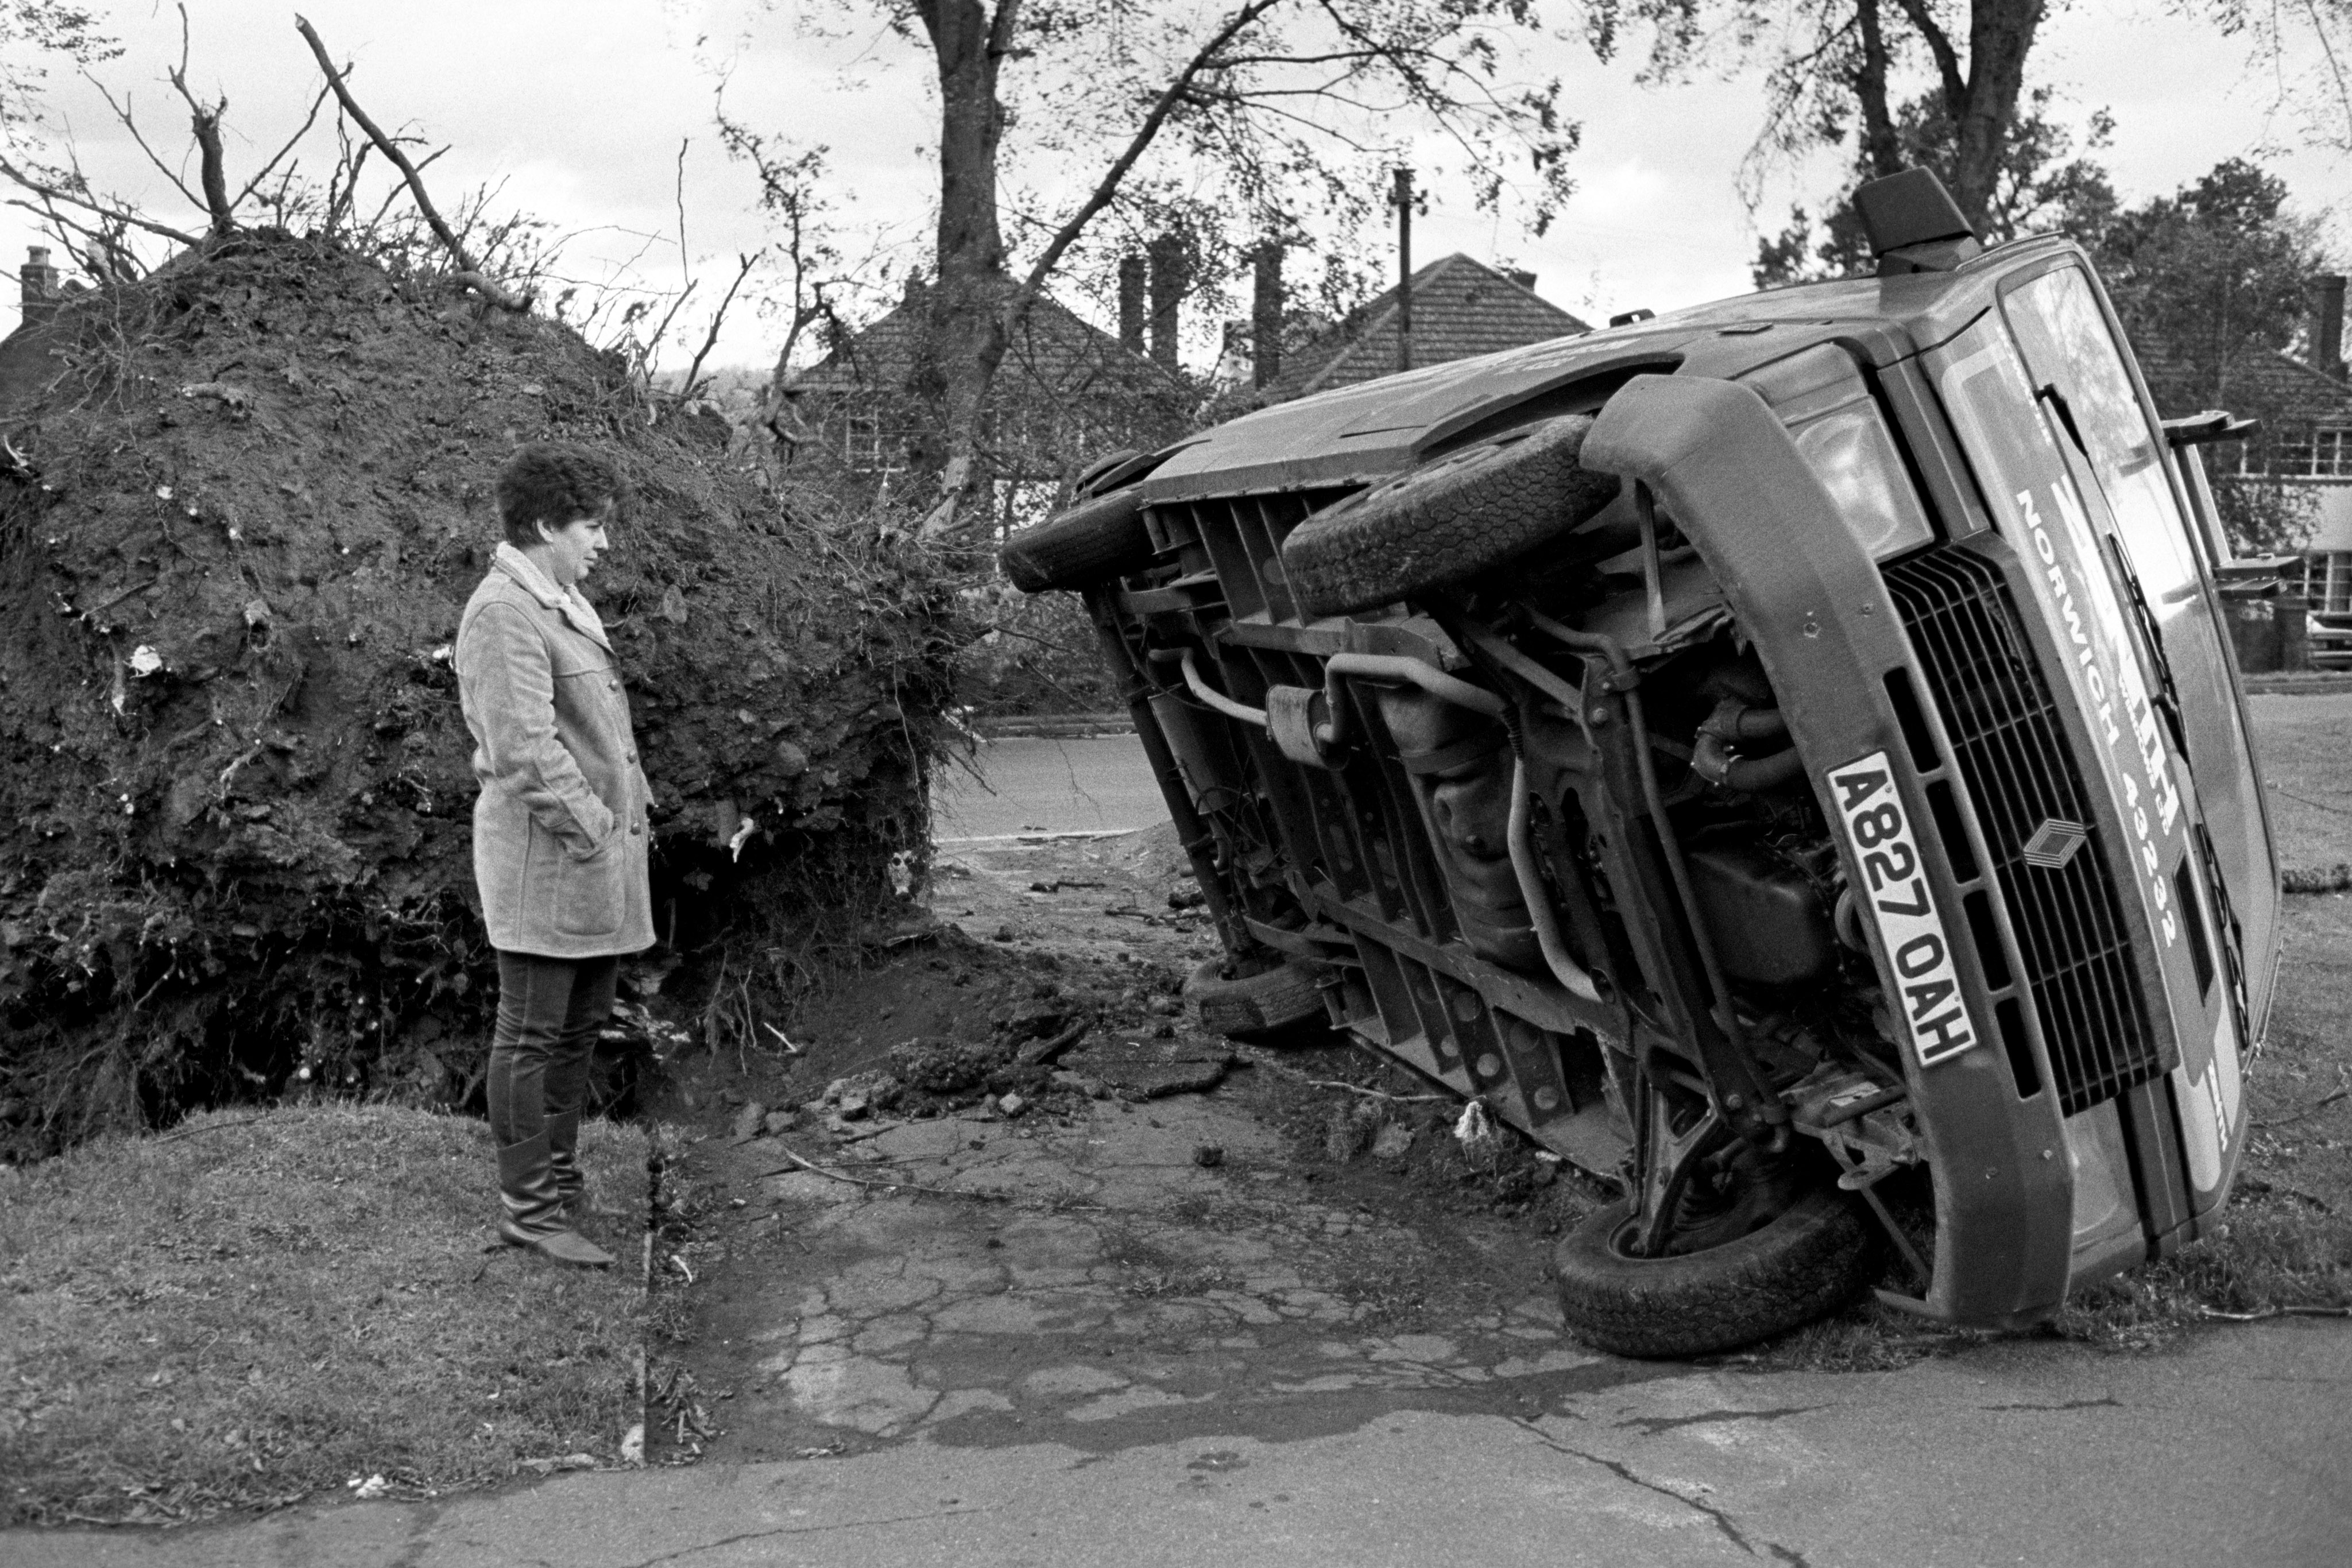 A passerby looks at a truck on its side next to a large uprooted tree trunk